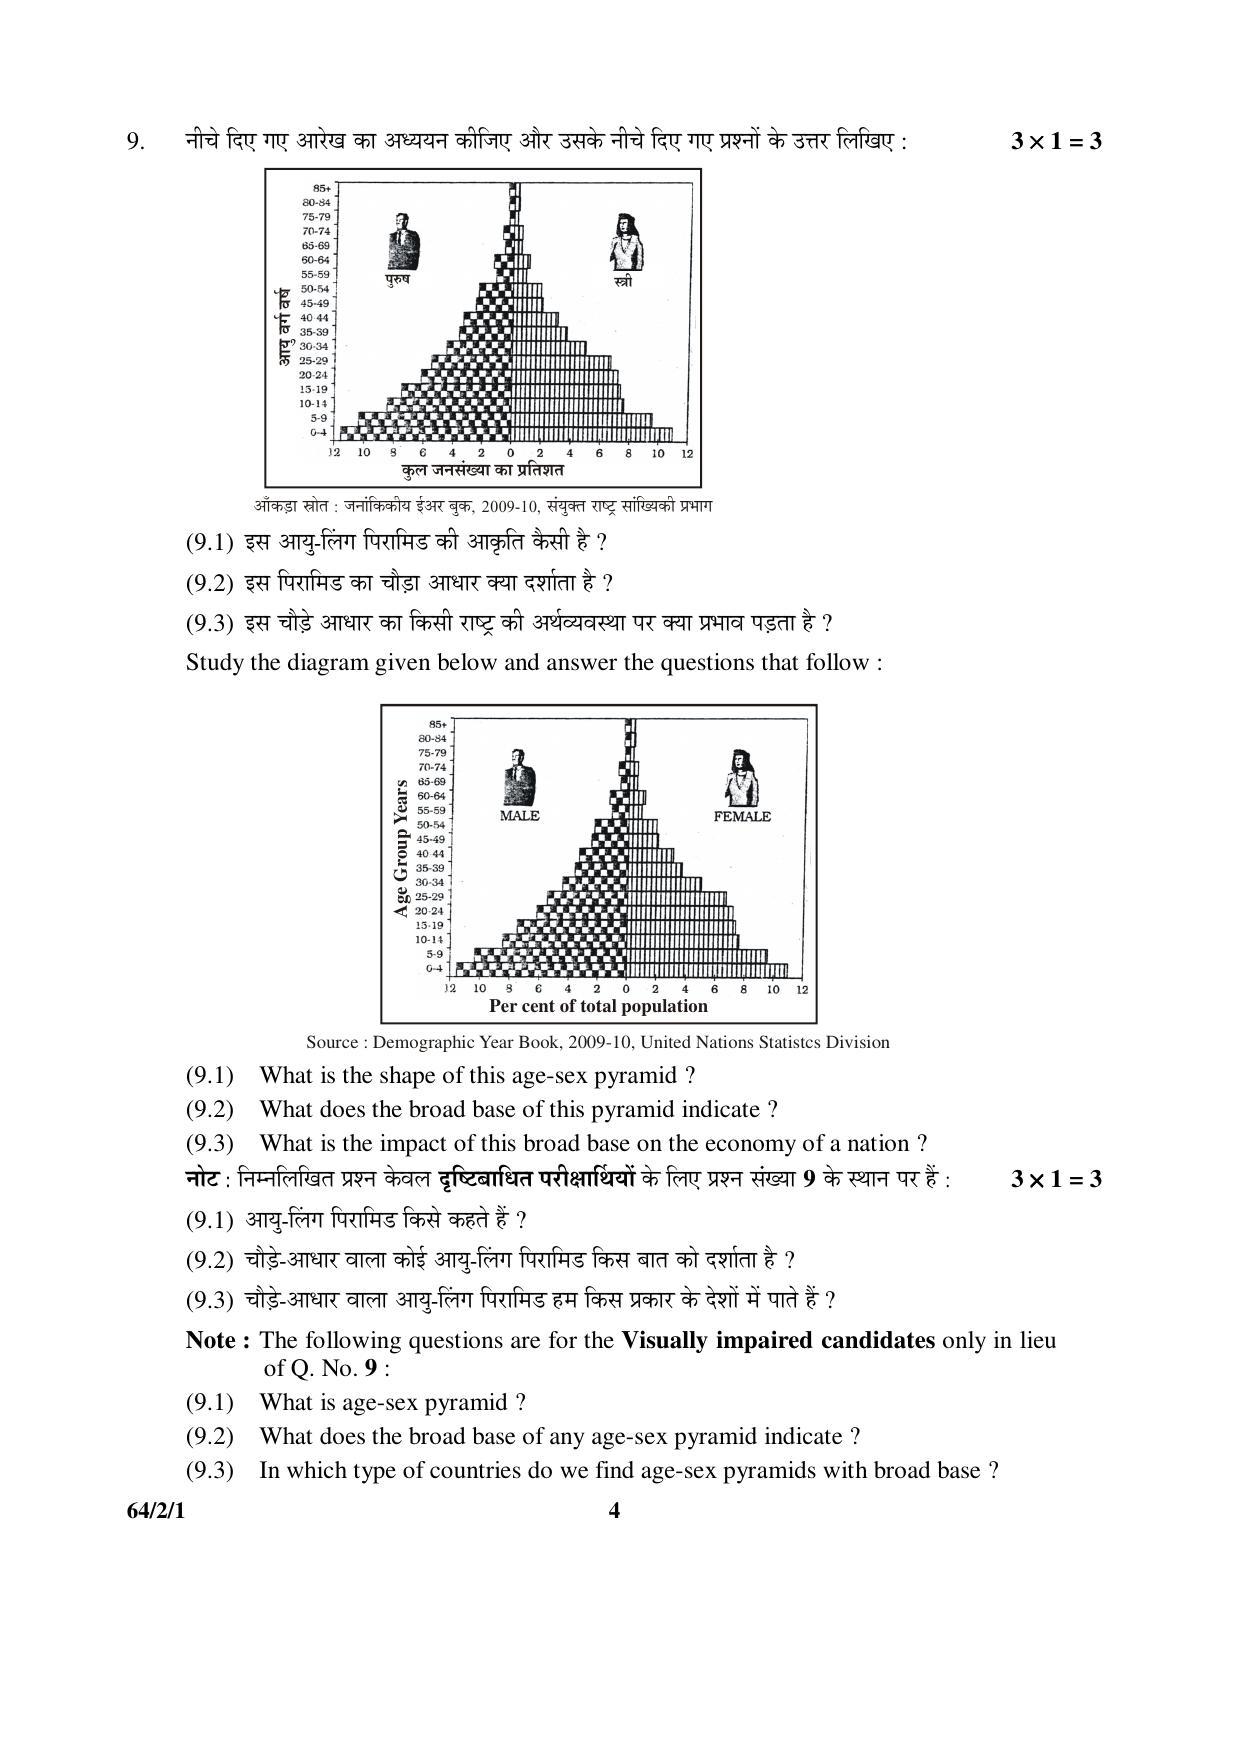 CBSE Class 12 64-2-1 Geography 2016 Question Paper - Page 4